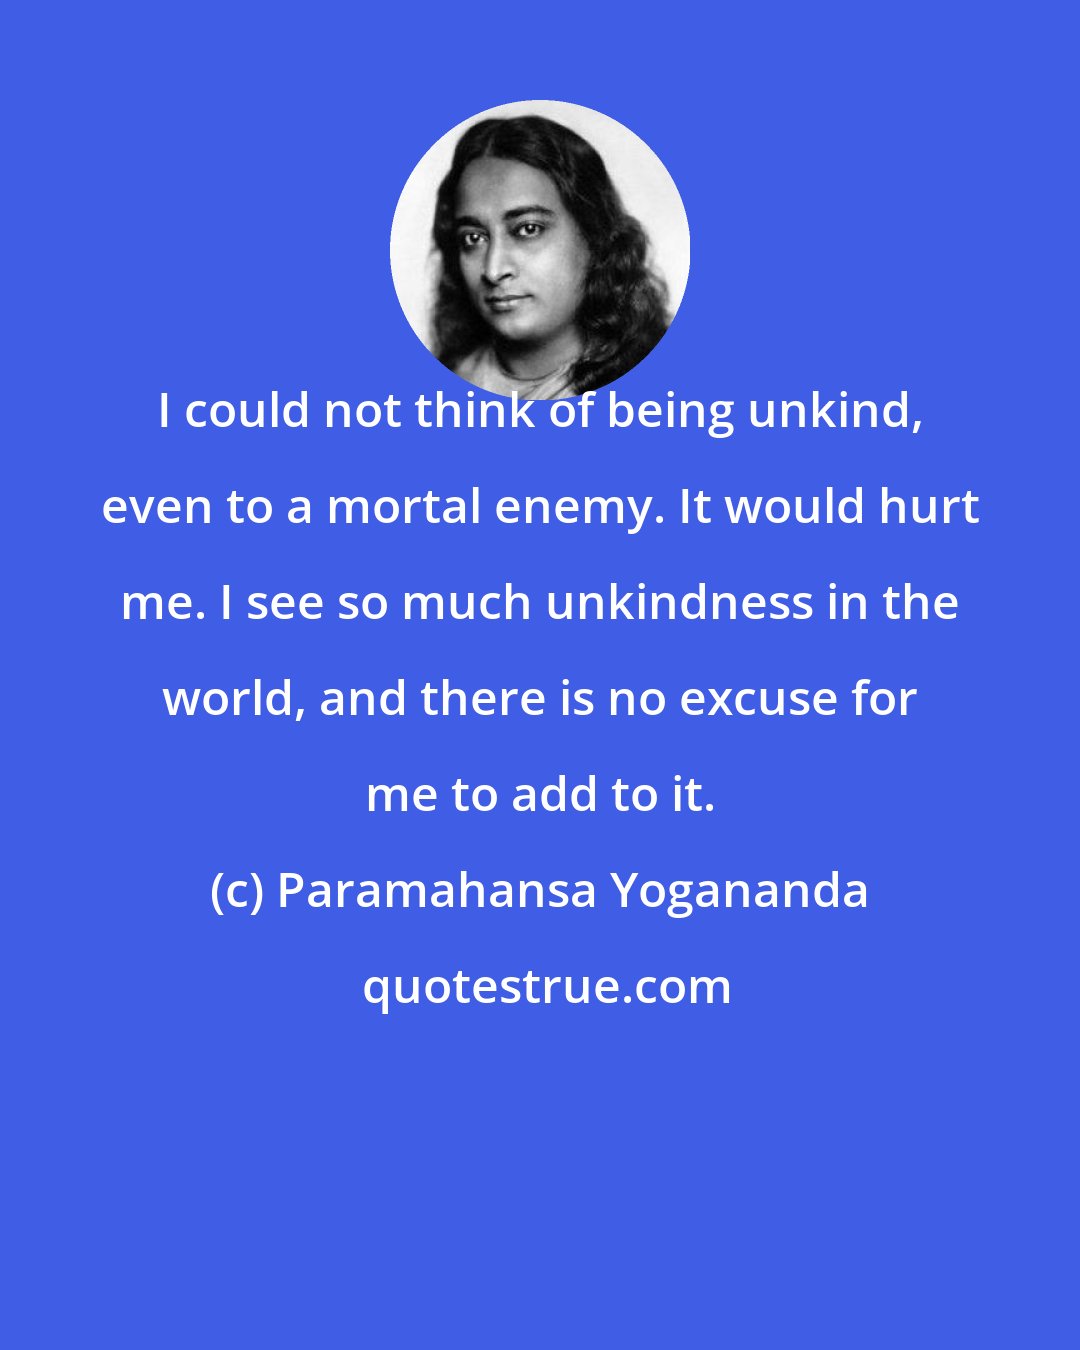 Paramahansa Yogananda: I could not think of being unkind, even to a mortal enemy. It would hurt me. I see so much unkindness in the world, and there is no excuse for me to add to it.